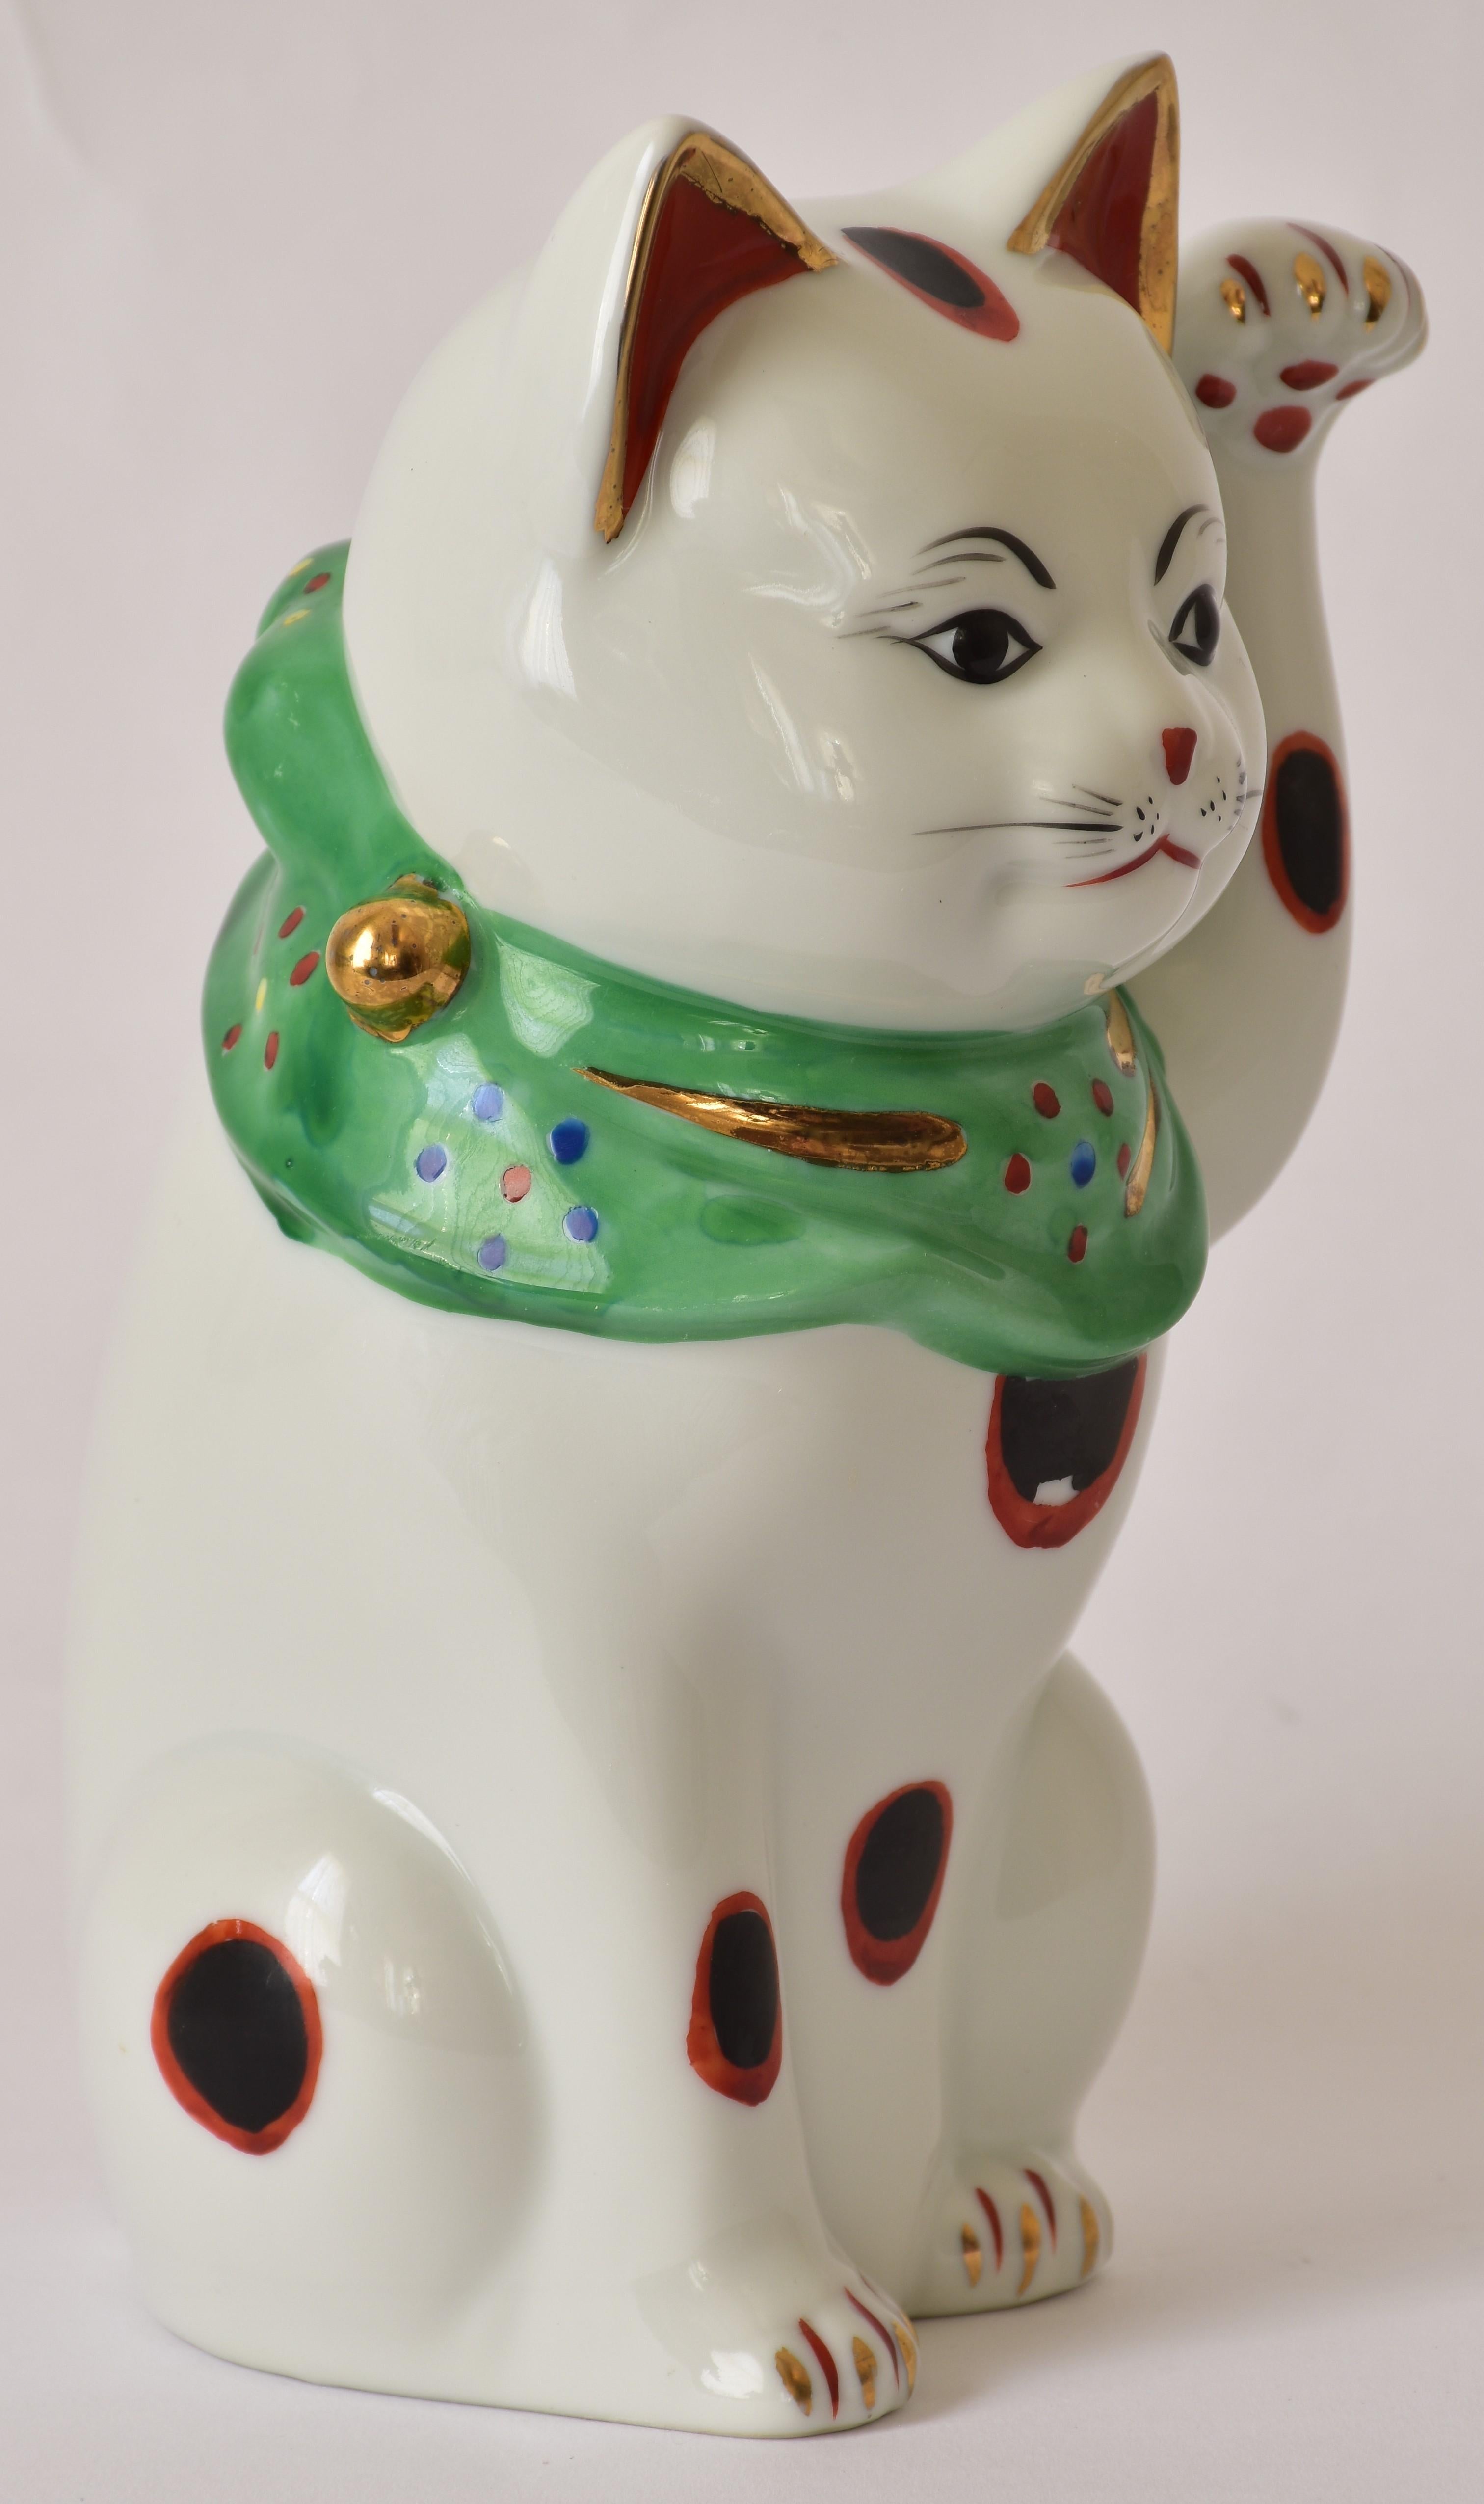 Charming left-handed Japanese porcelain beckoning cat (maneki neko,) gilded and hand painted porcelain piece from the Kutani region of Japan. The beckoning cat comes in two varieties. The more common right-handed beckoning cat (with right paw